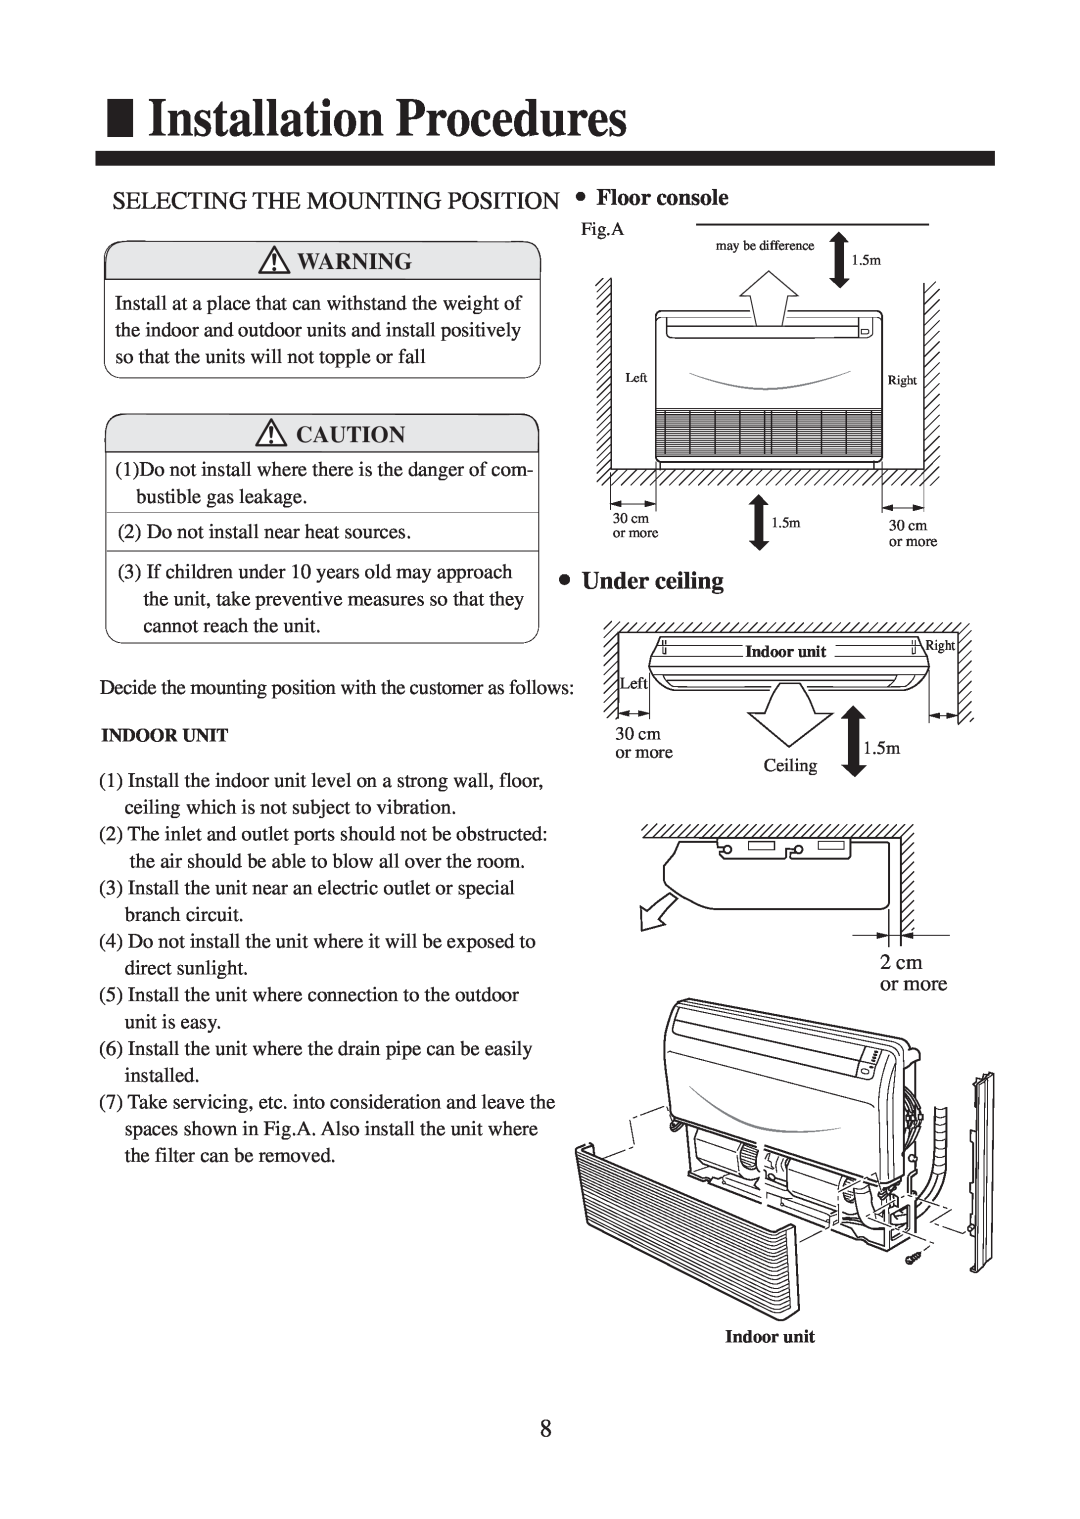 Haier AC182XCERA Installation Procedures, SELECTING THE MOUNTING POSITION Floor console, Under ceiling, cm or more 